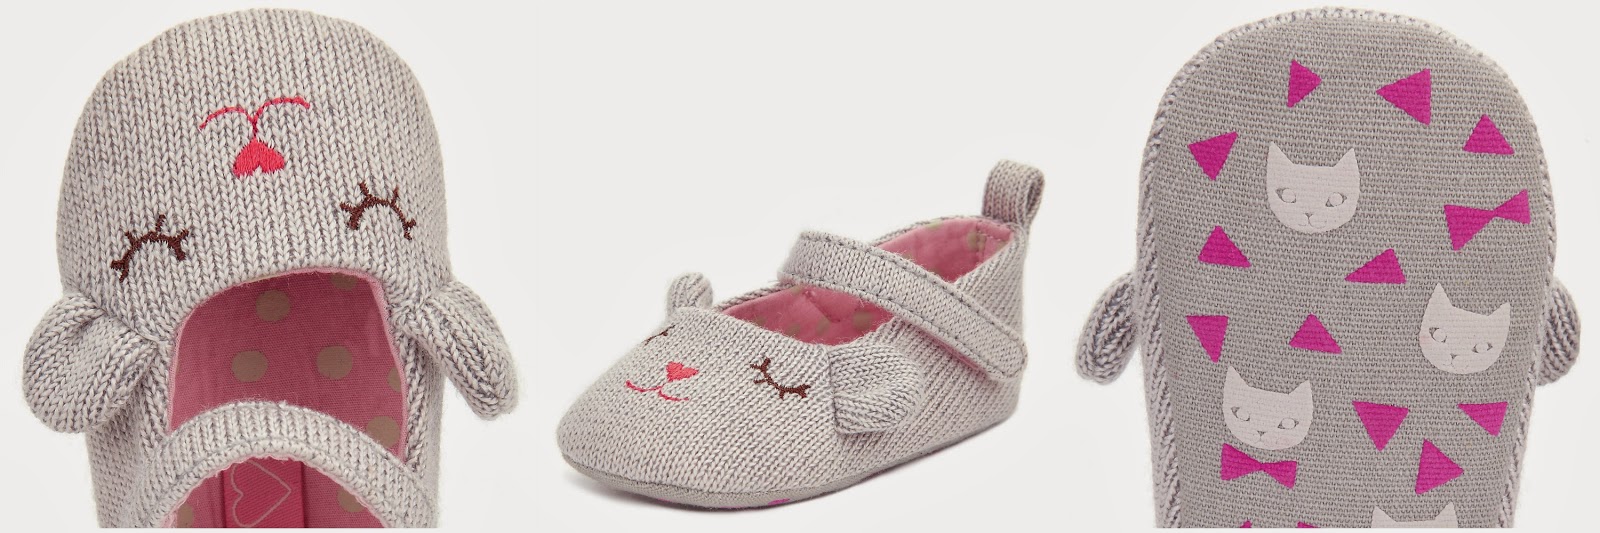 First baby pram shoes from Clarks - and my pick of the rest! | pram shoes | marks & spencer | crib shoes | first shoes | clarks | clarks pram shoes | ned collection | baby first shoes | shoes for babies | alex and alexa | next | vevian | la coquet | clarks first shoes for babies | clarks shoes | baby shoes | early days shoes | classic baby shoes mayoral | leather brogues for babies | crib she's for little feet } kids shoes | babies shoes | mamasVIB | fashion | style | kids fashion | new nor | gift ideas | mamasVIB 